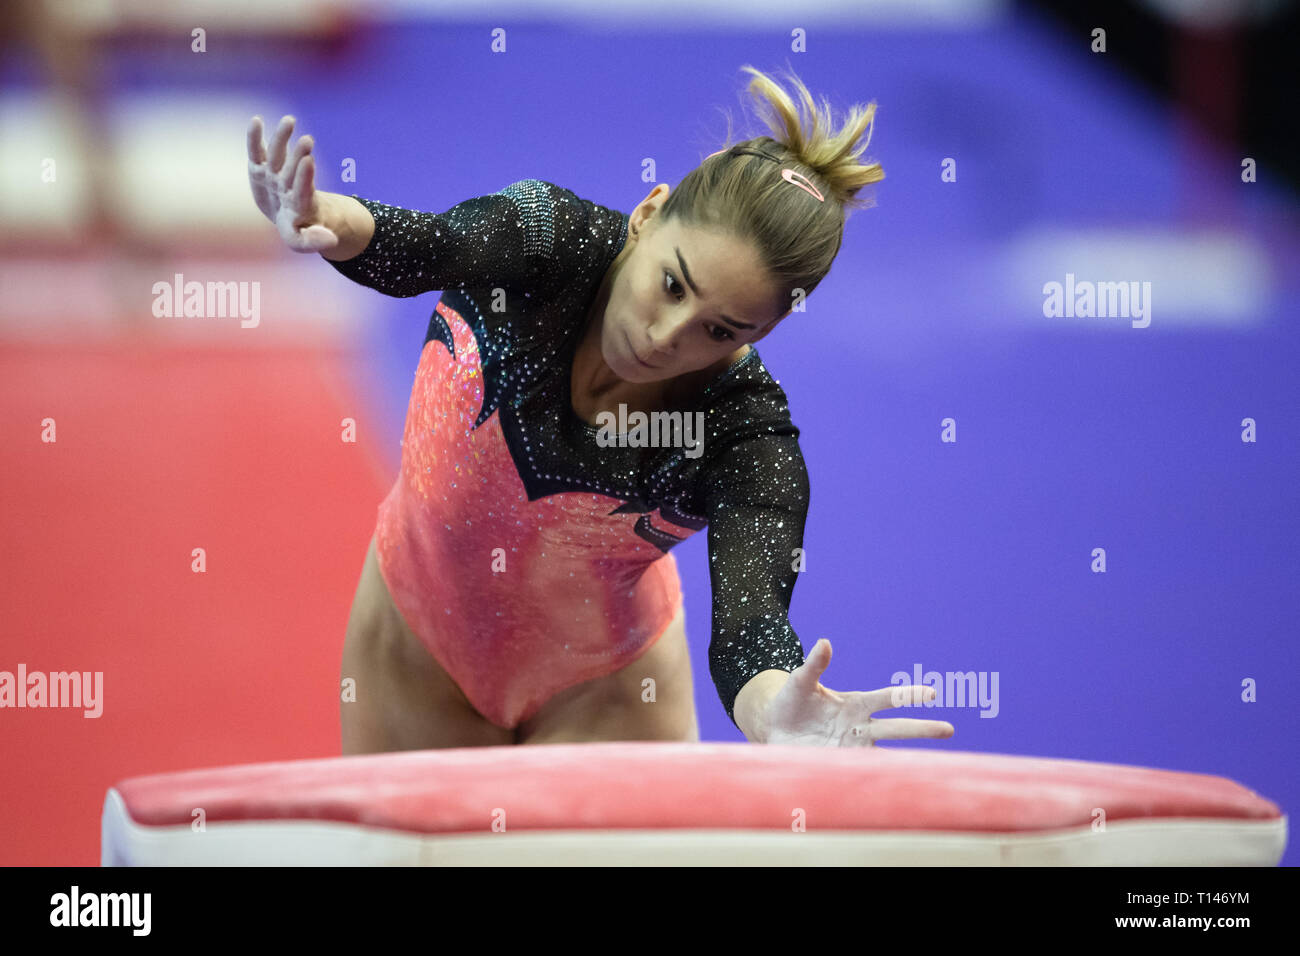 London, UK. 23rd March, 2019. Ayelen Tarabini performs on the Vault during the Matchroom Multisport presents the 2019 Superstars of Gymnastics at The O2 Arena on Saturday, 23 March 2019. LONDON ENGLAND. Credit: Taka G Wu/Alamy News Stock Photo